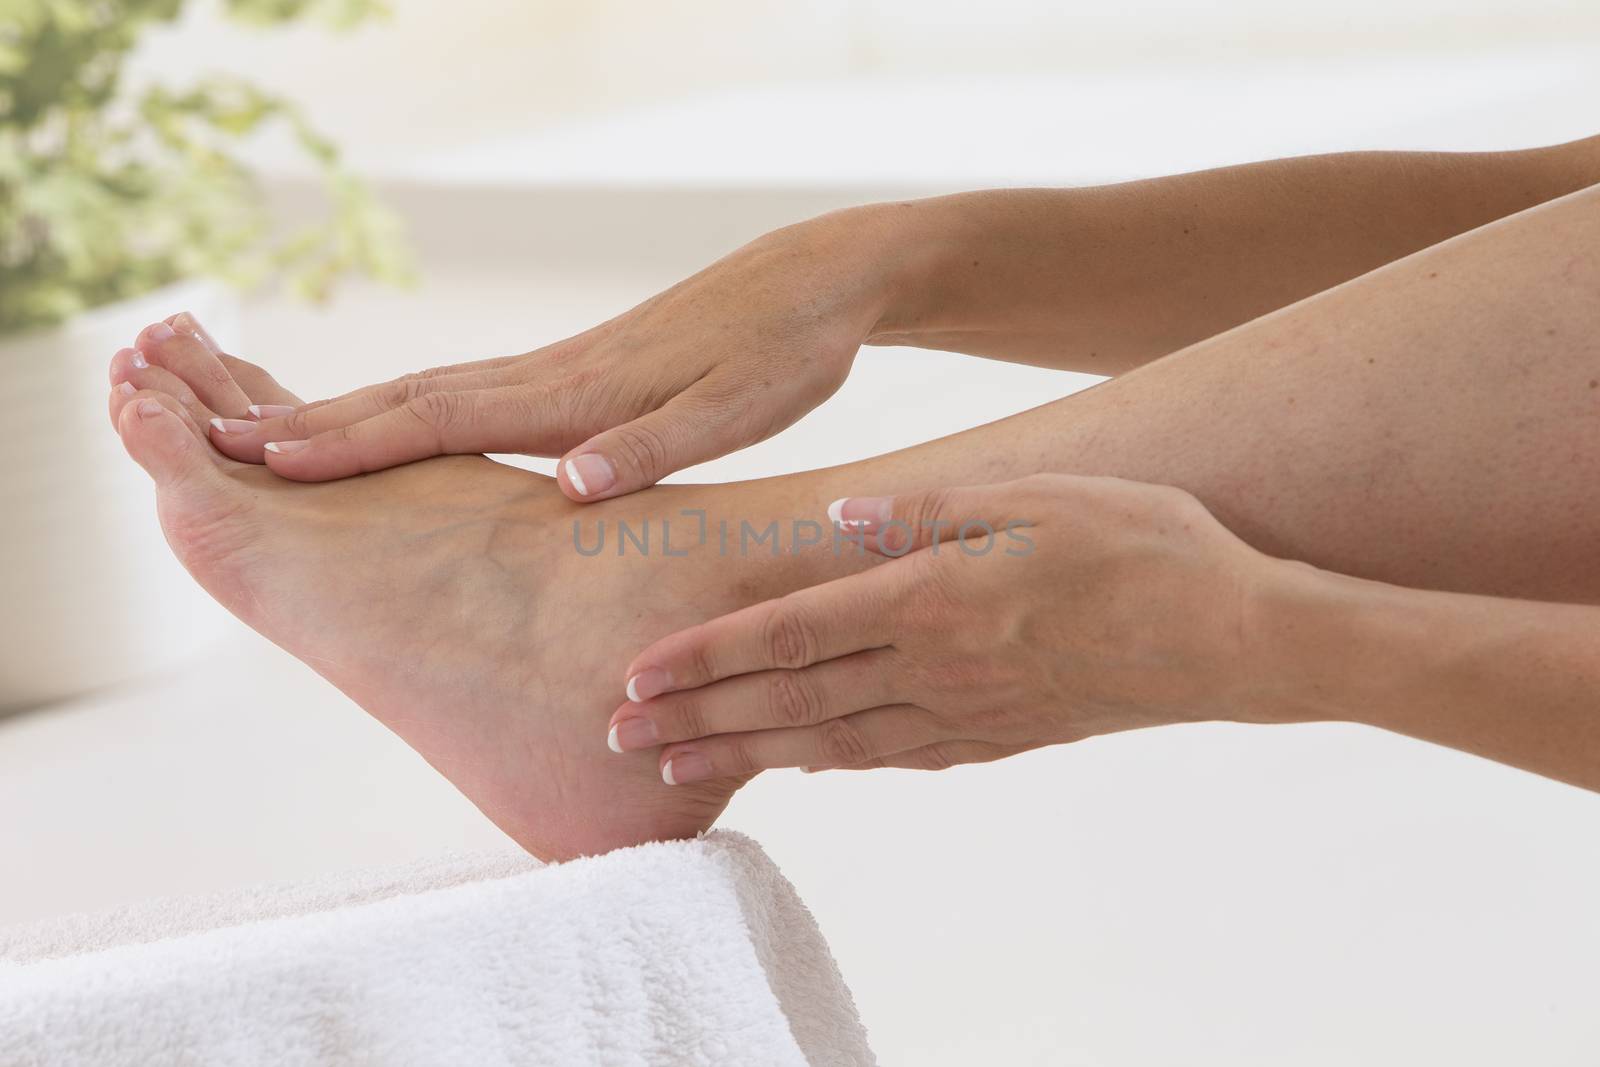 Woman massaging her foot and ankle  with manucured nail by JPC-PROD